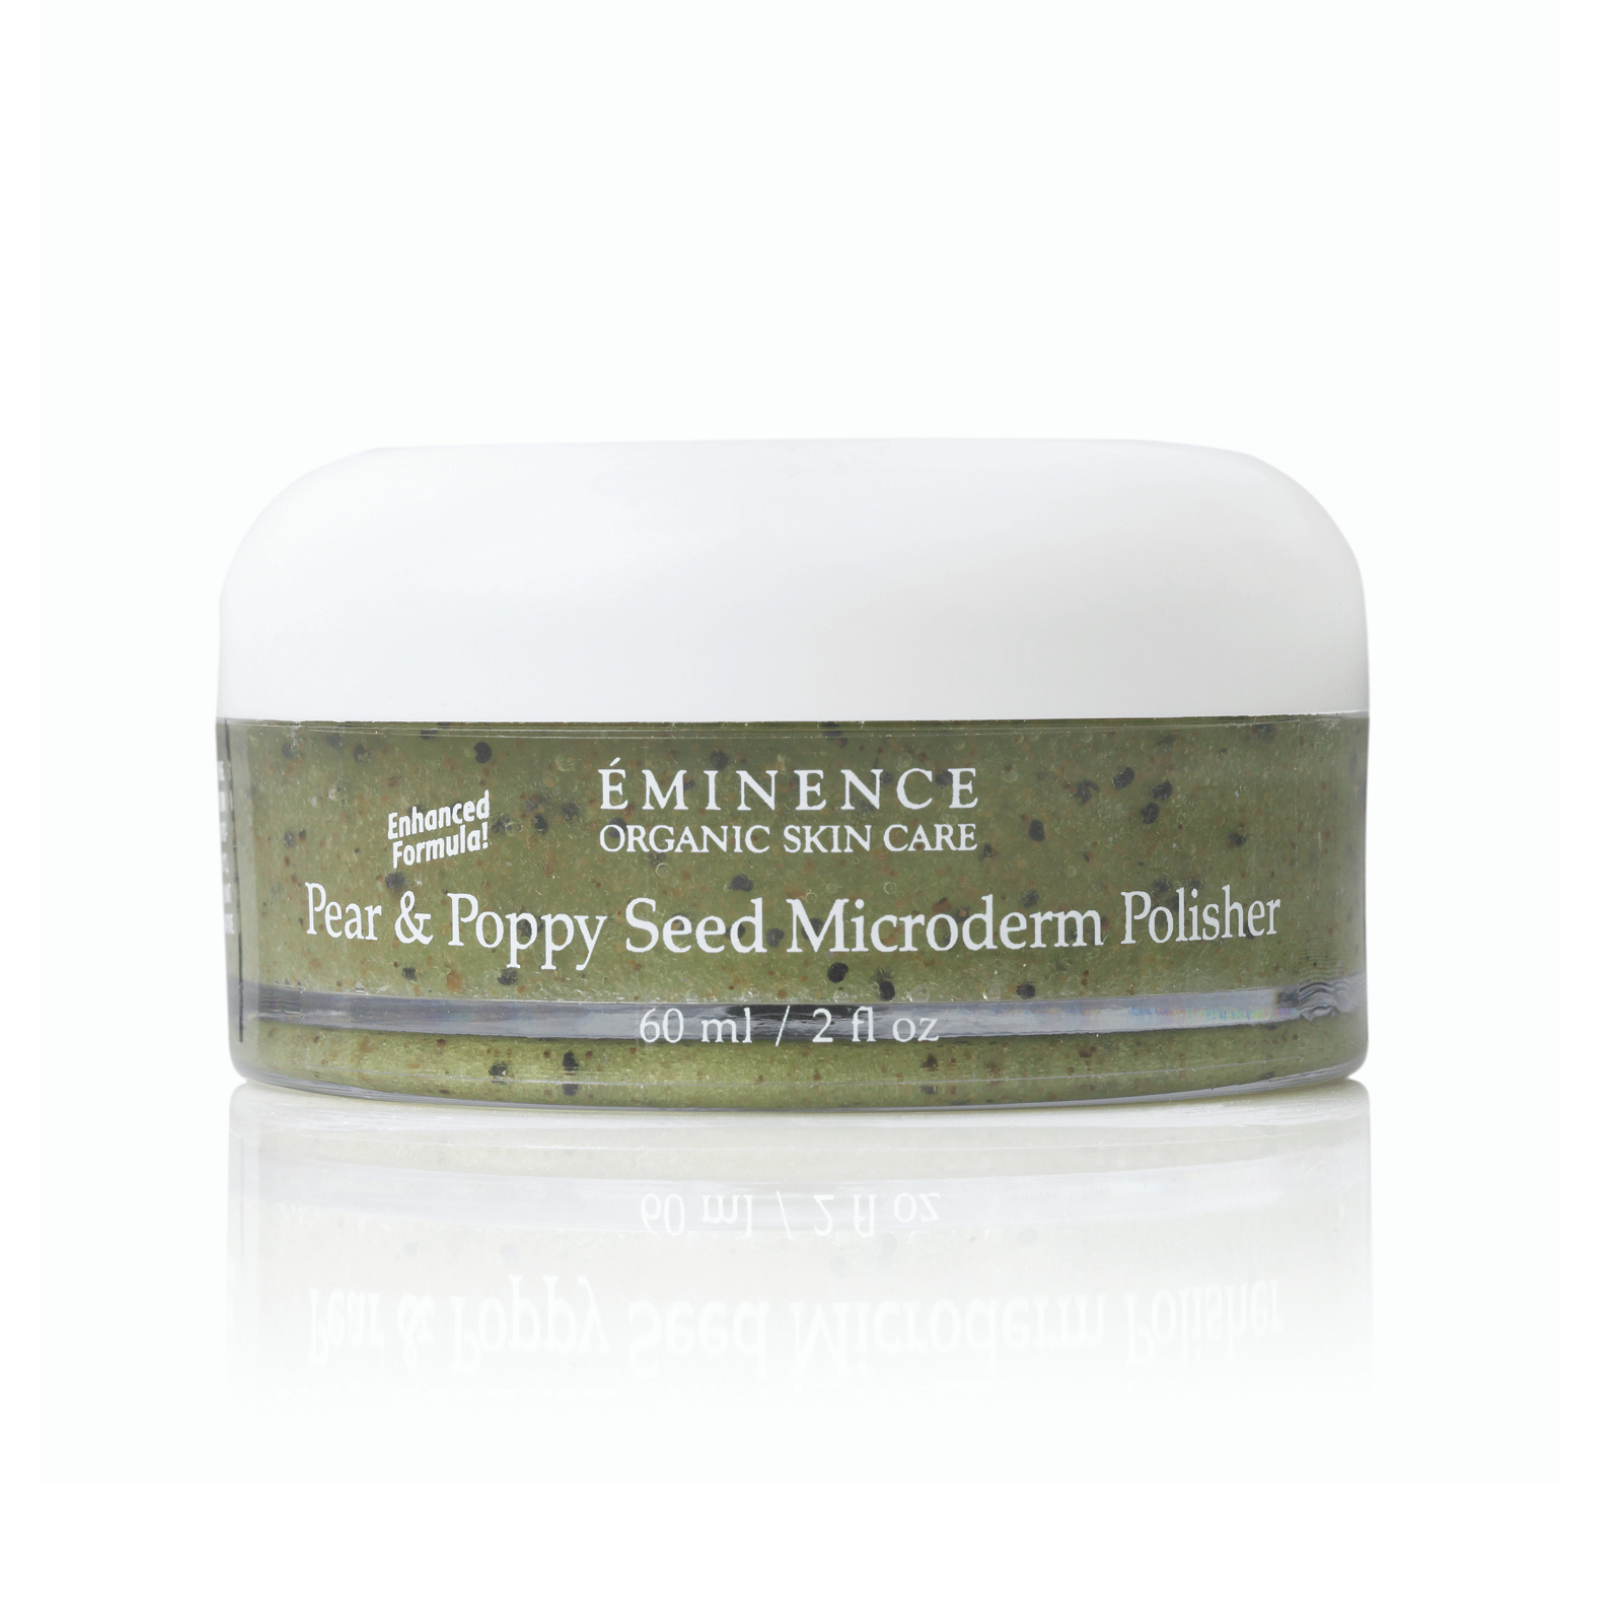 Eminence Pear and Poppy Seed Microderm Polisher 60ml